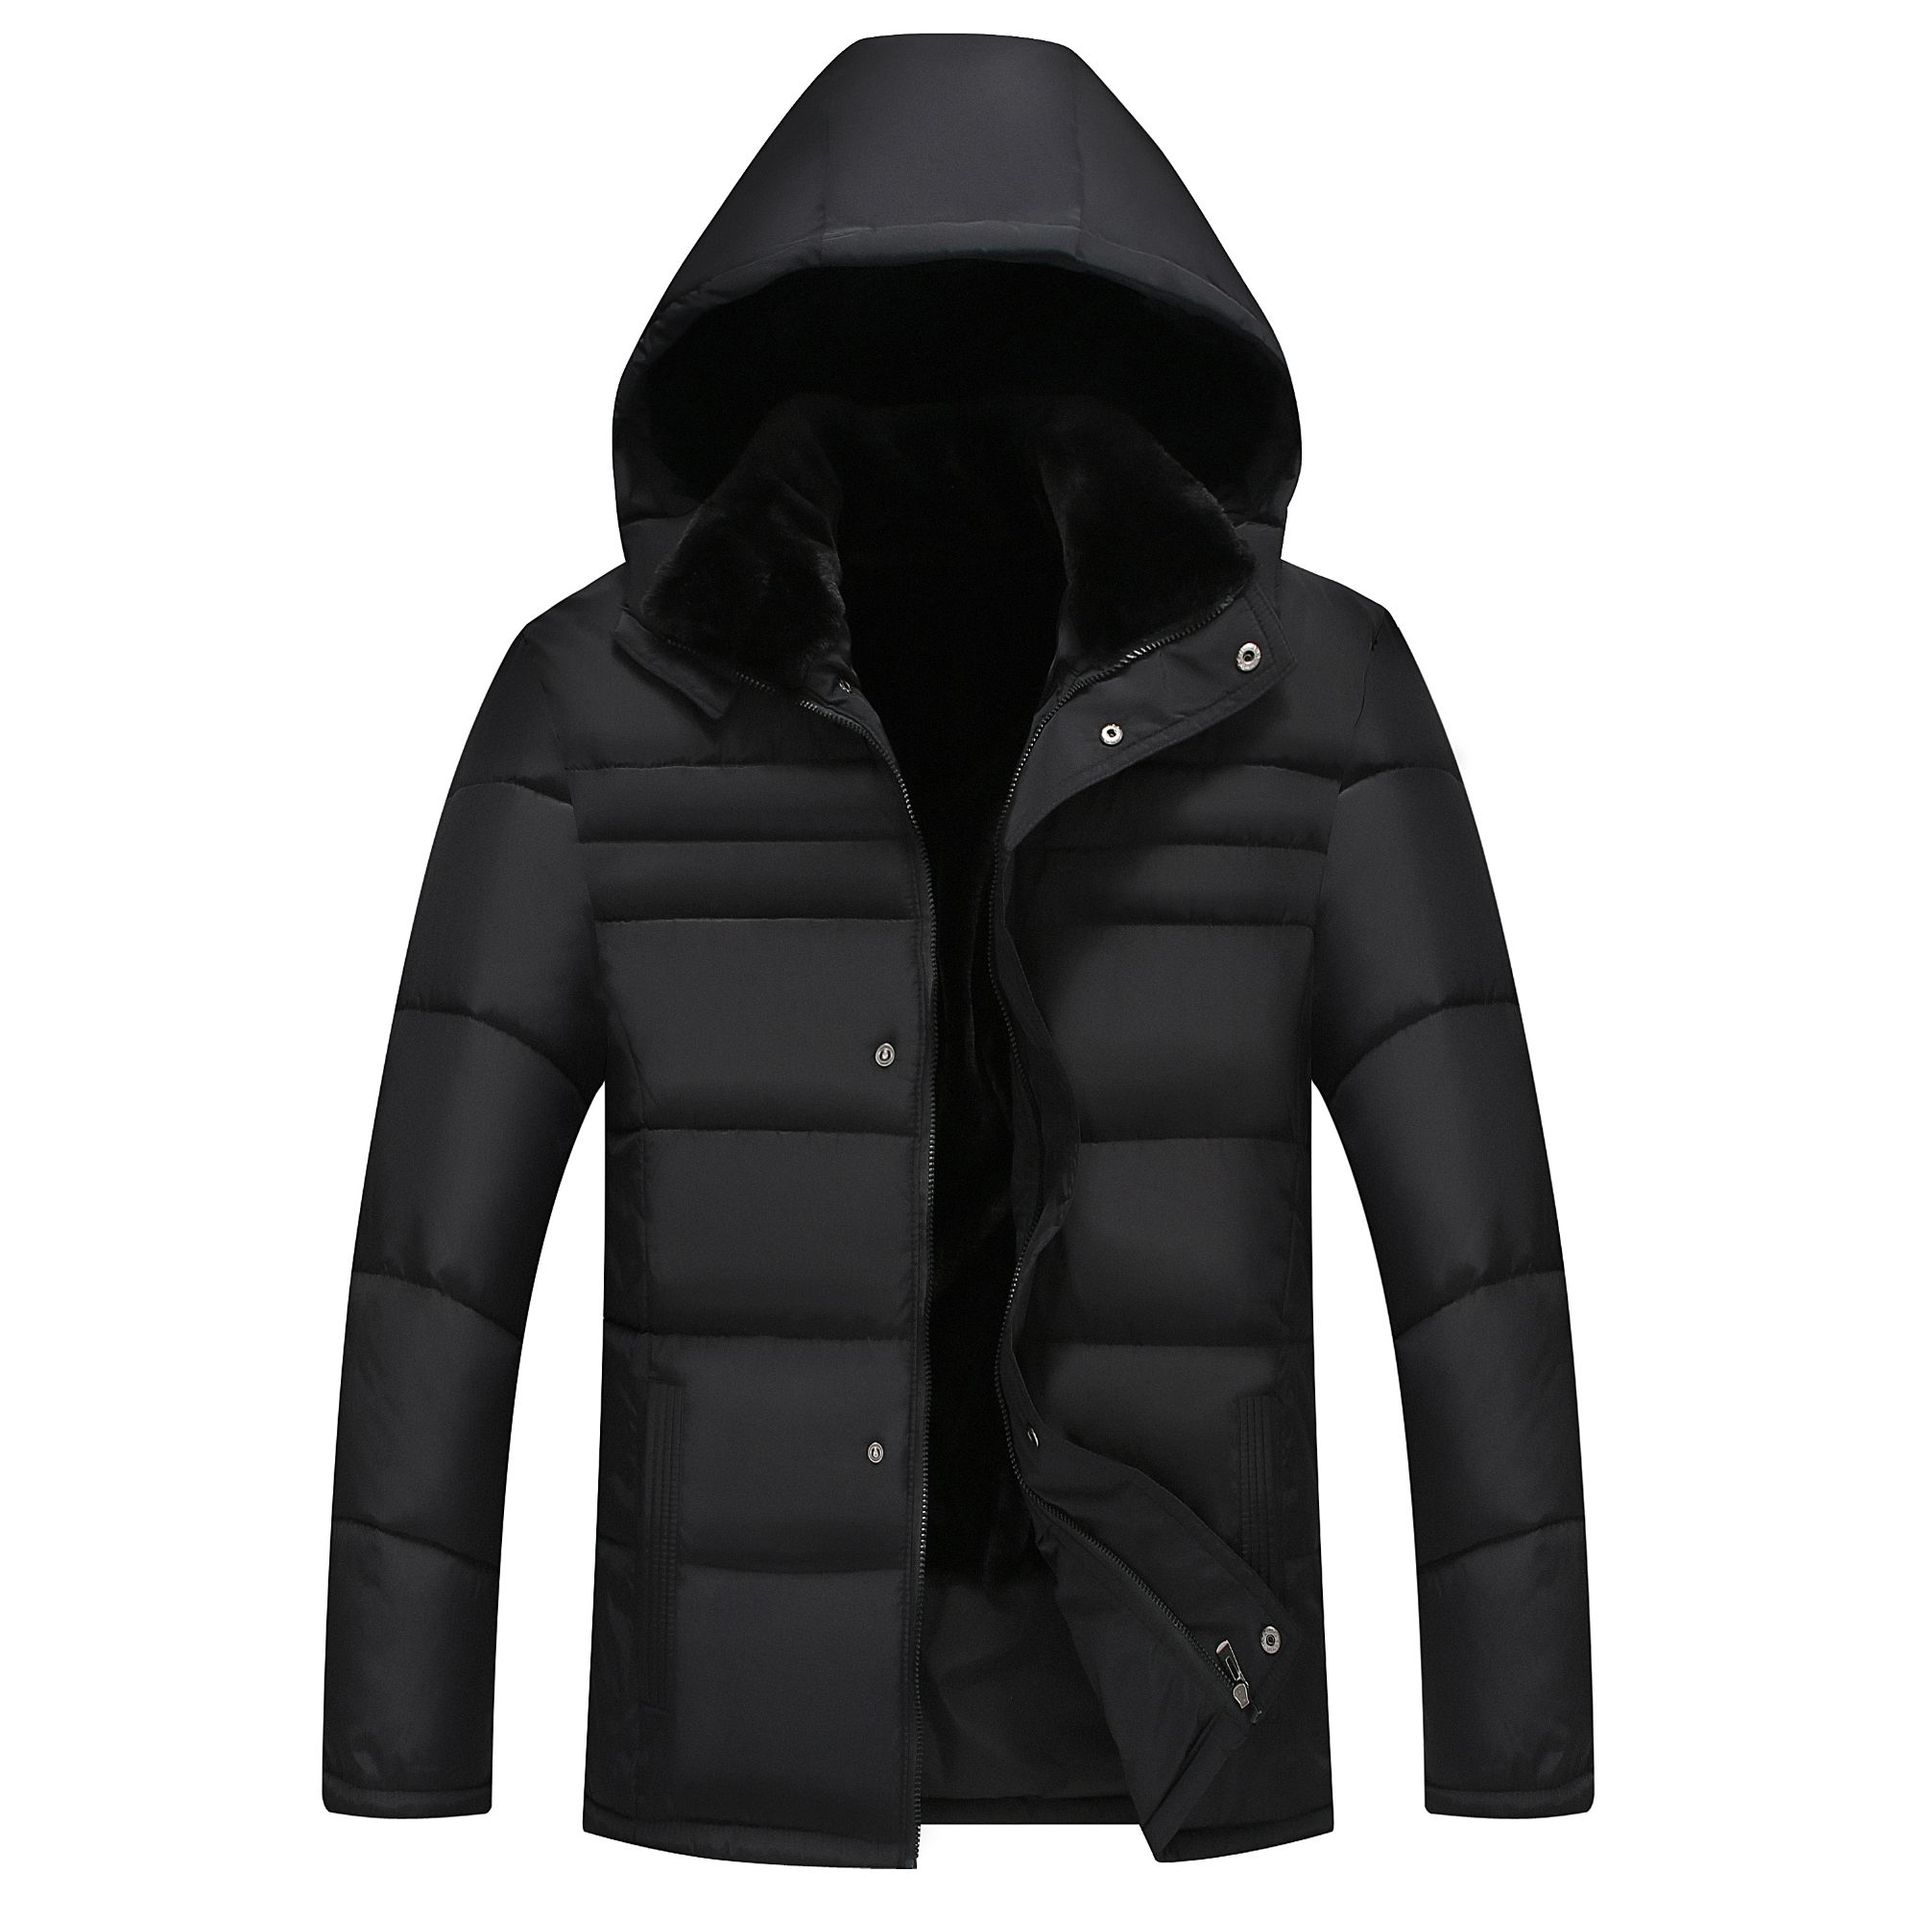 Fleece Middle-aged Men's Autumn And Winter Padded Jacket shopper-ever.myshopify.com